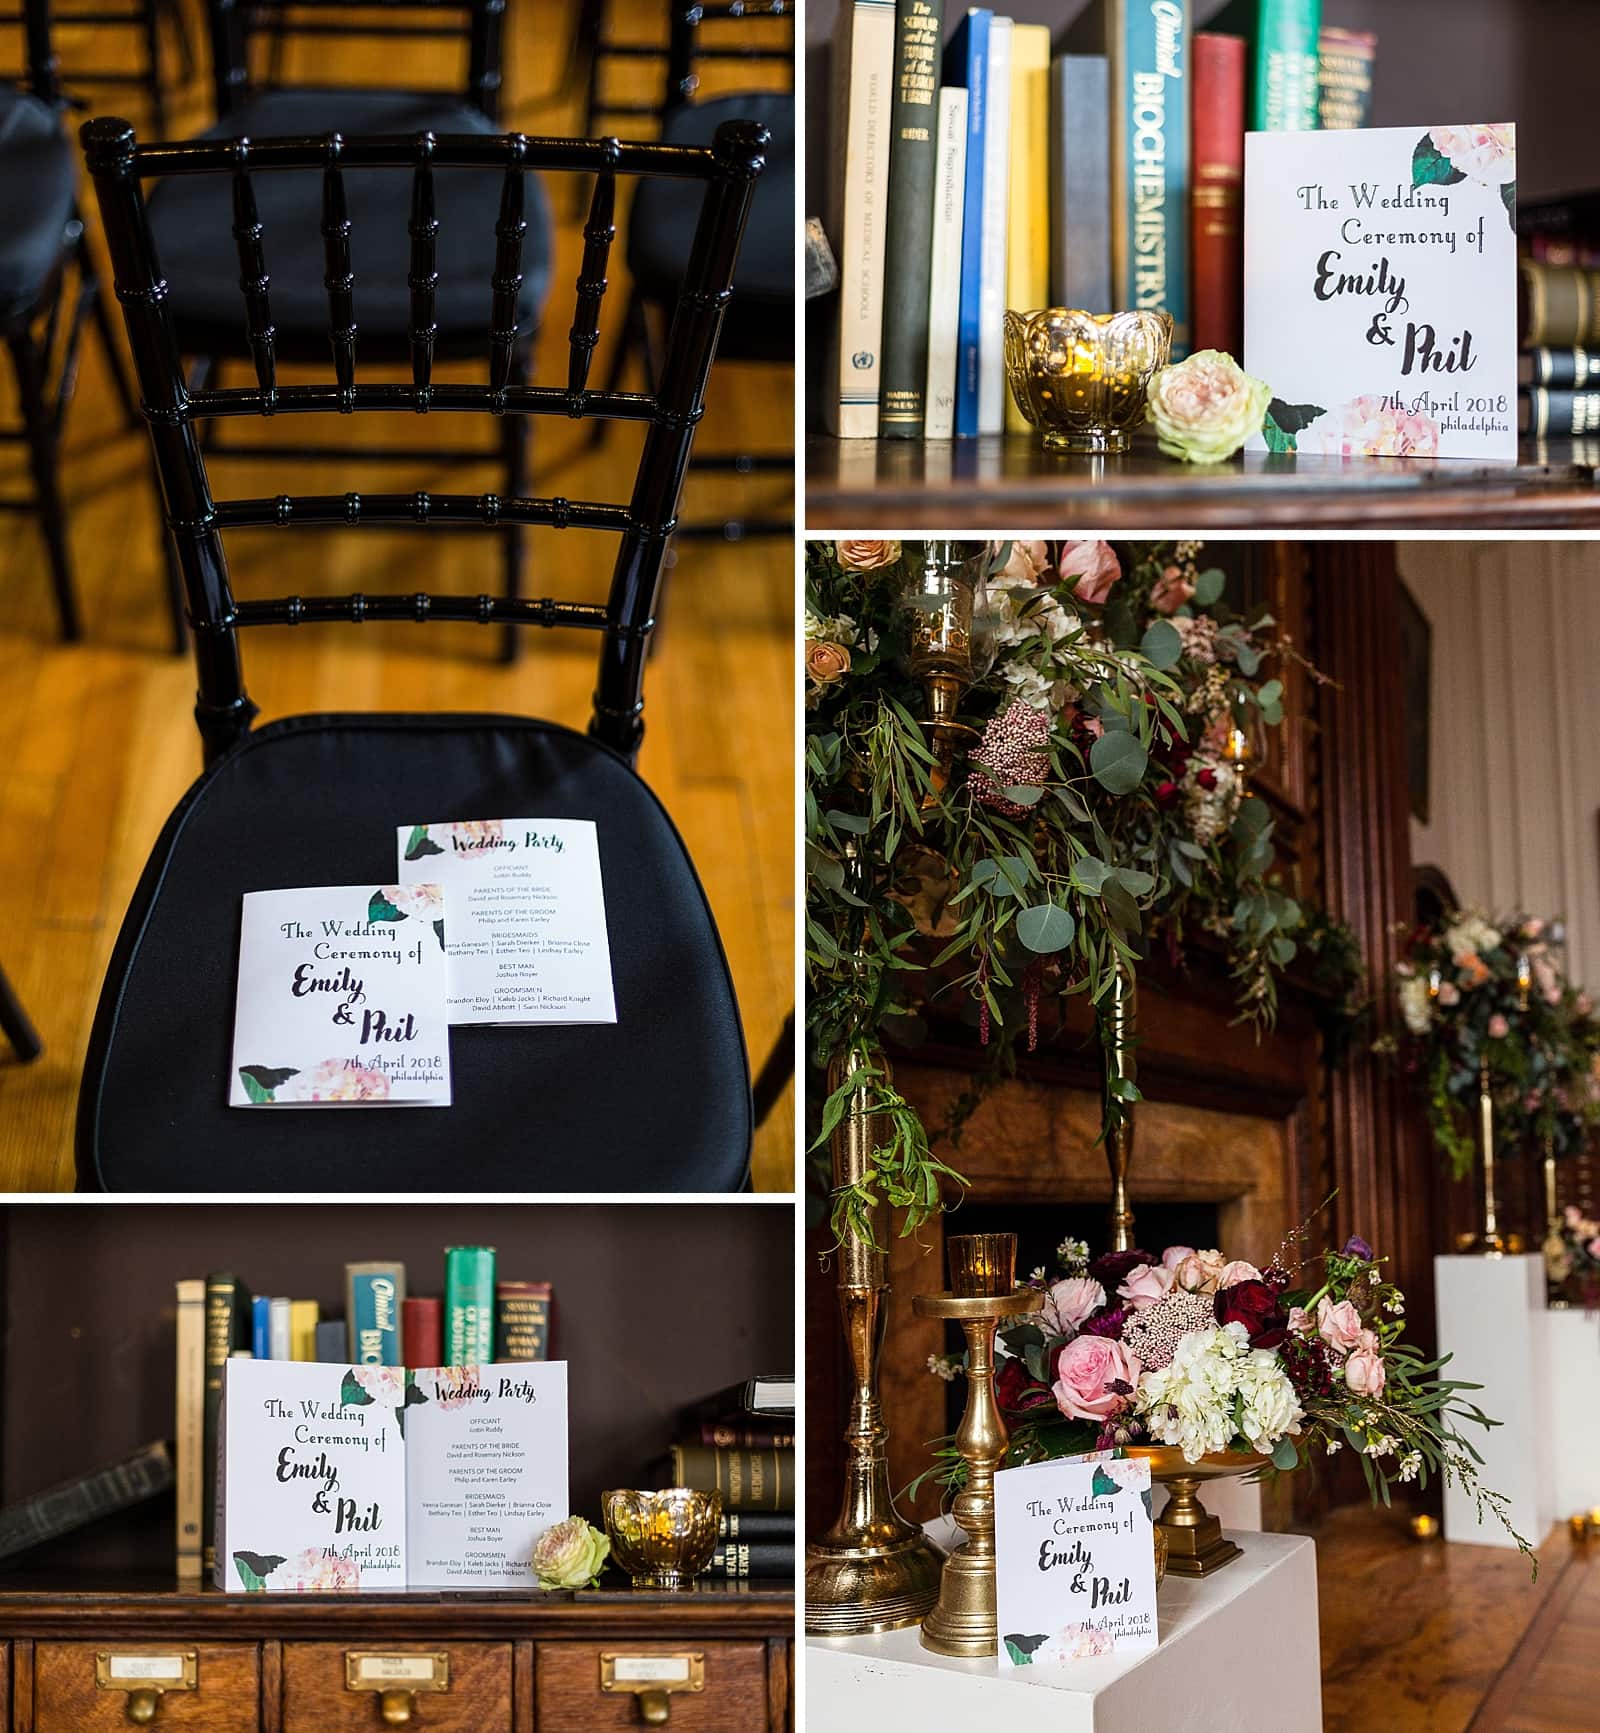 Stationary, books, and gold centerpiece floral details, College of Physicians wedding